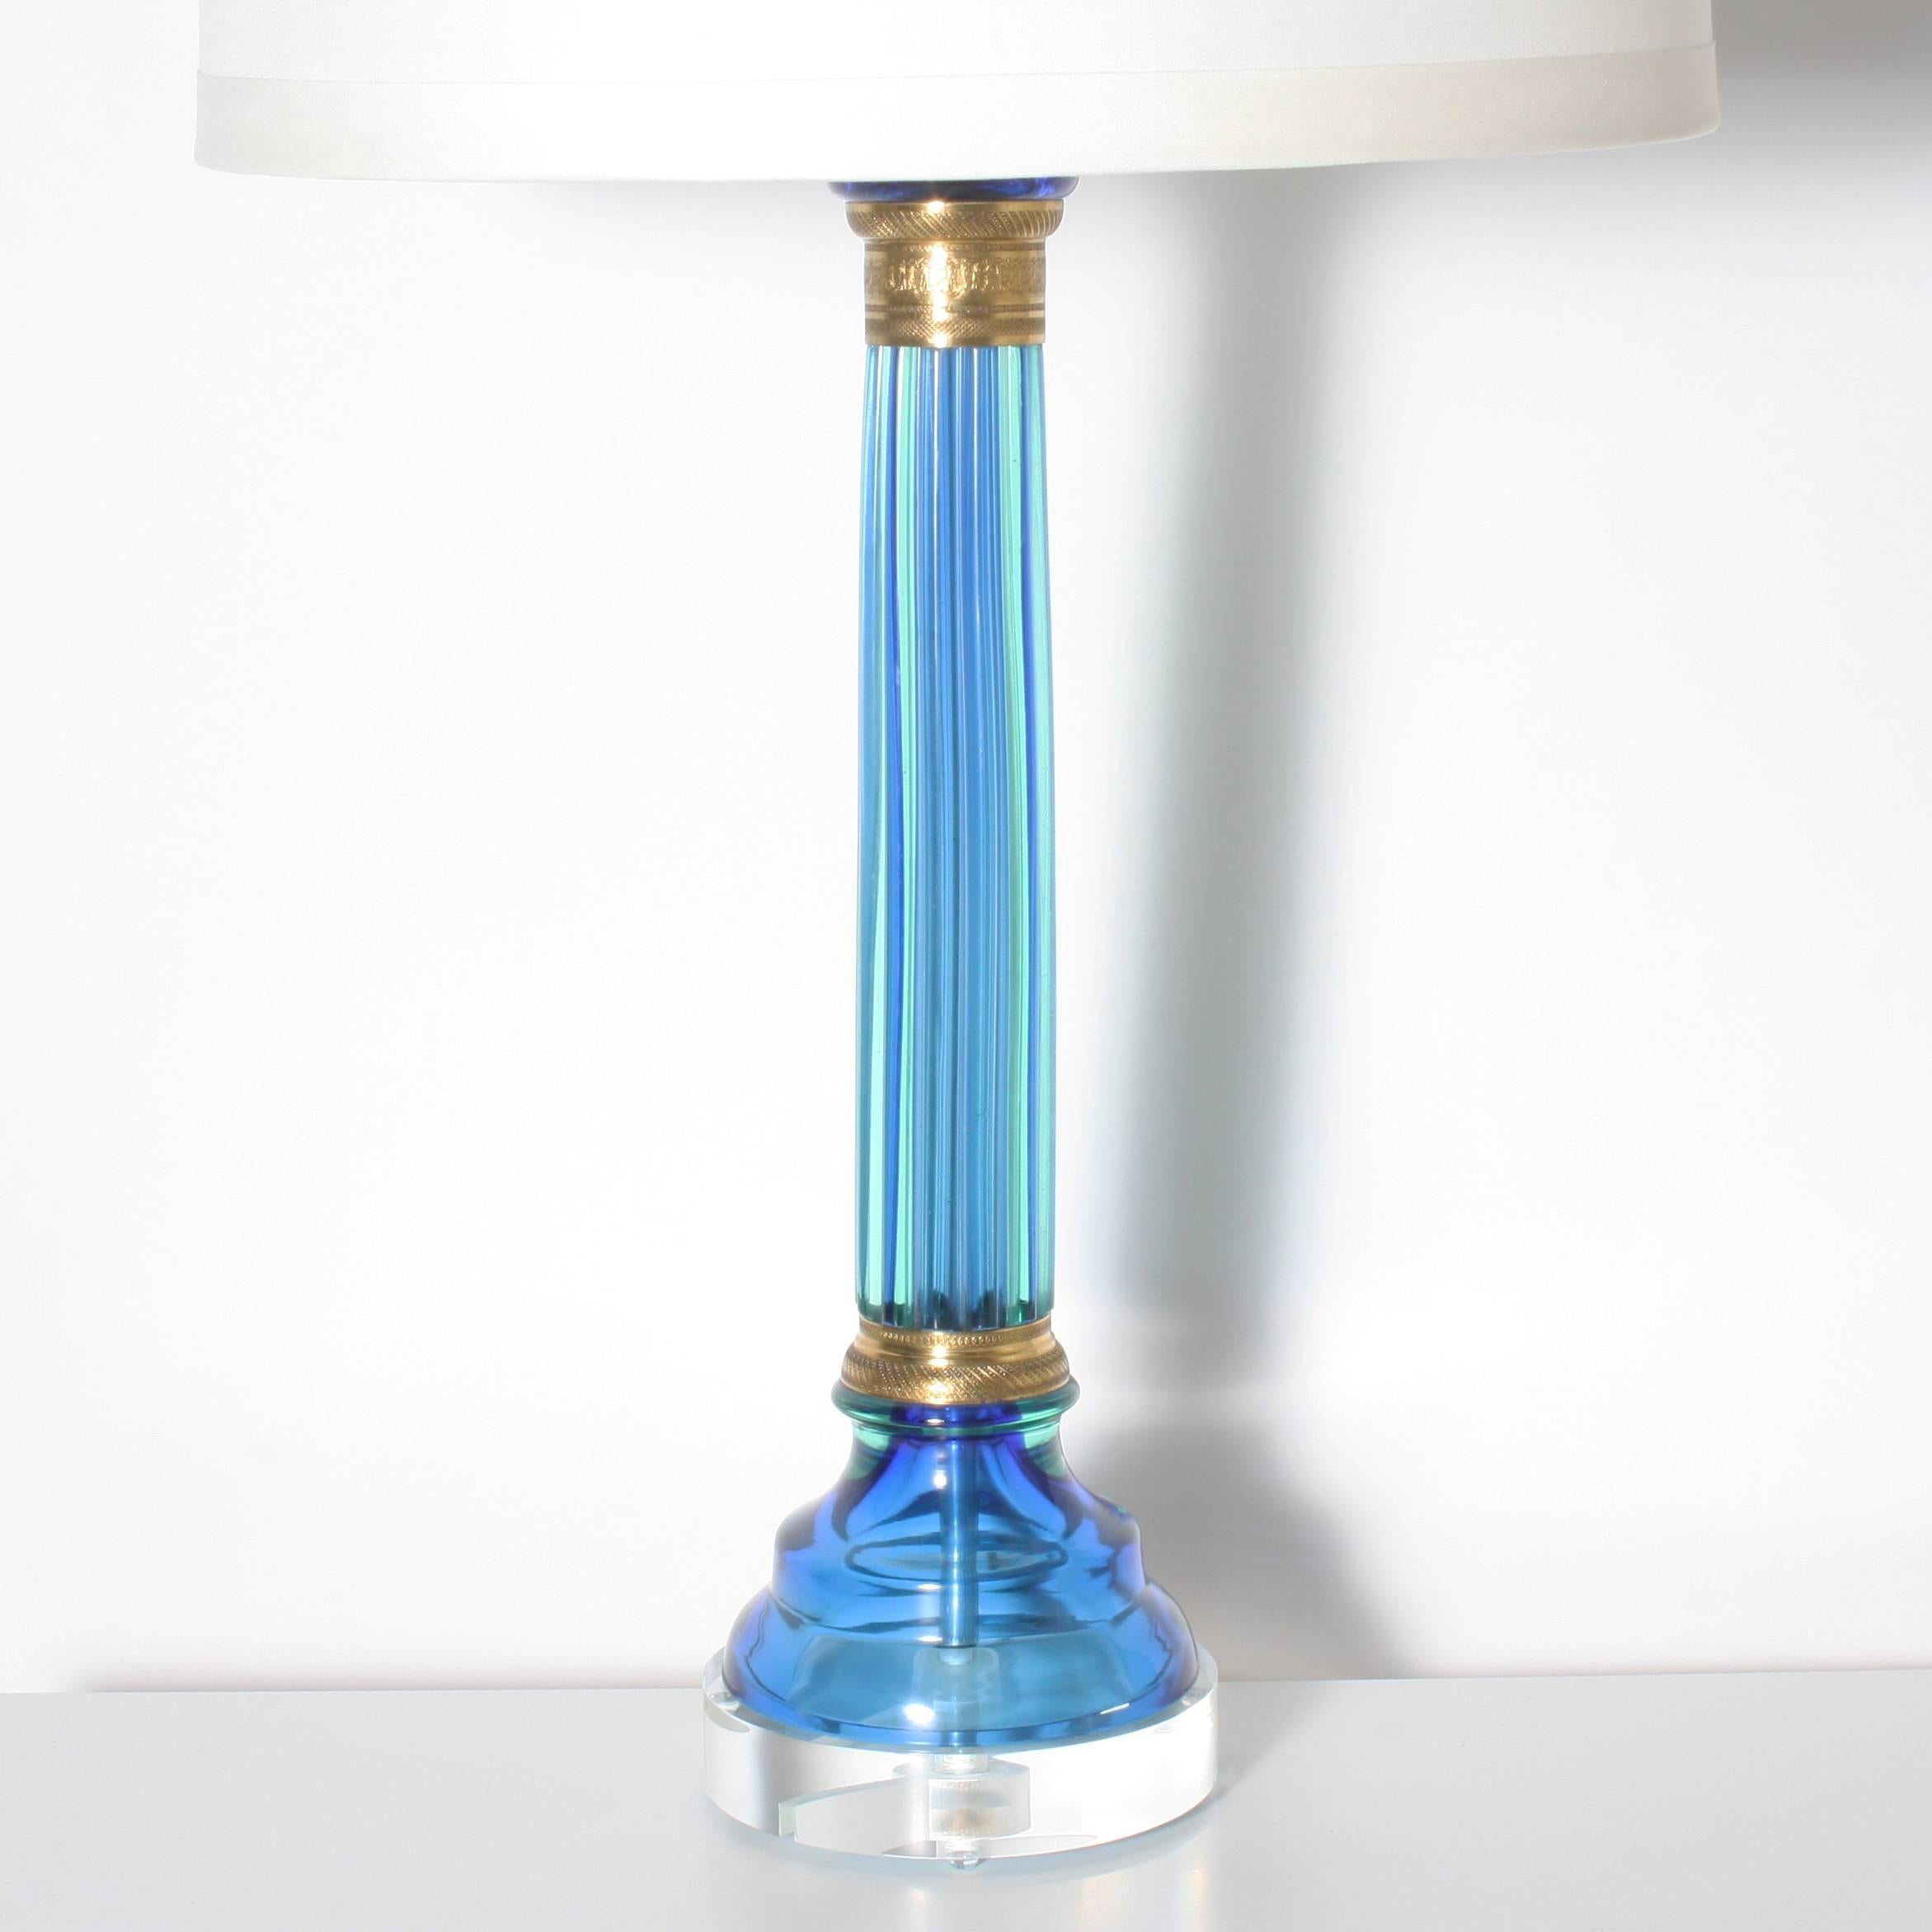 Pair of blue Marbro Murano lamps by Seguso. Off-white pongee shade. 3 way socket, 50/100/150 watt. Brass hardware. Lucite base. Crystal ball finial. Gold twisted cording.